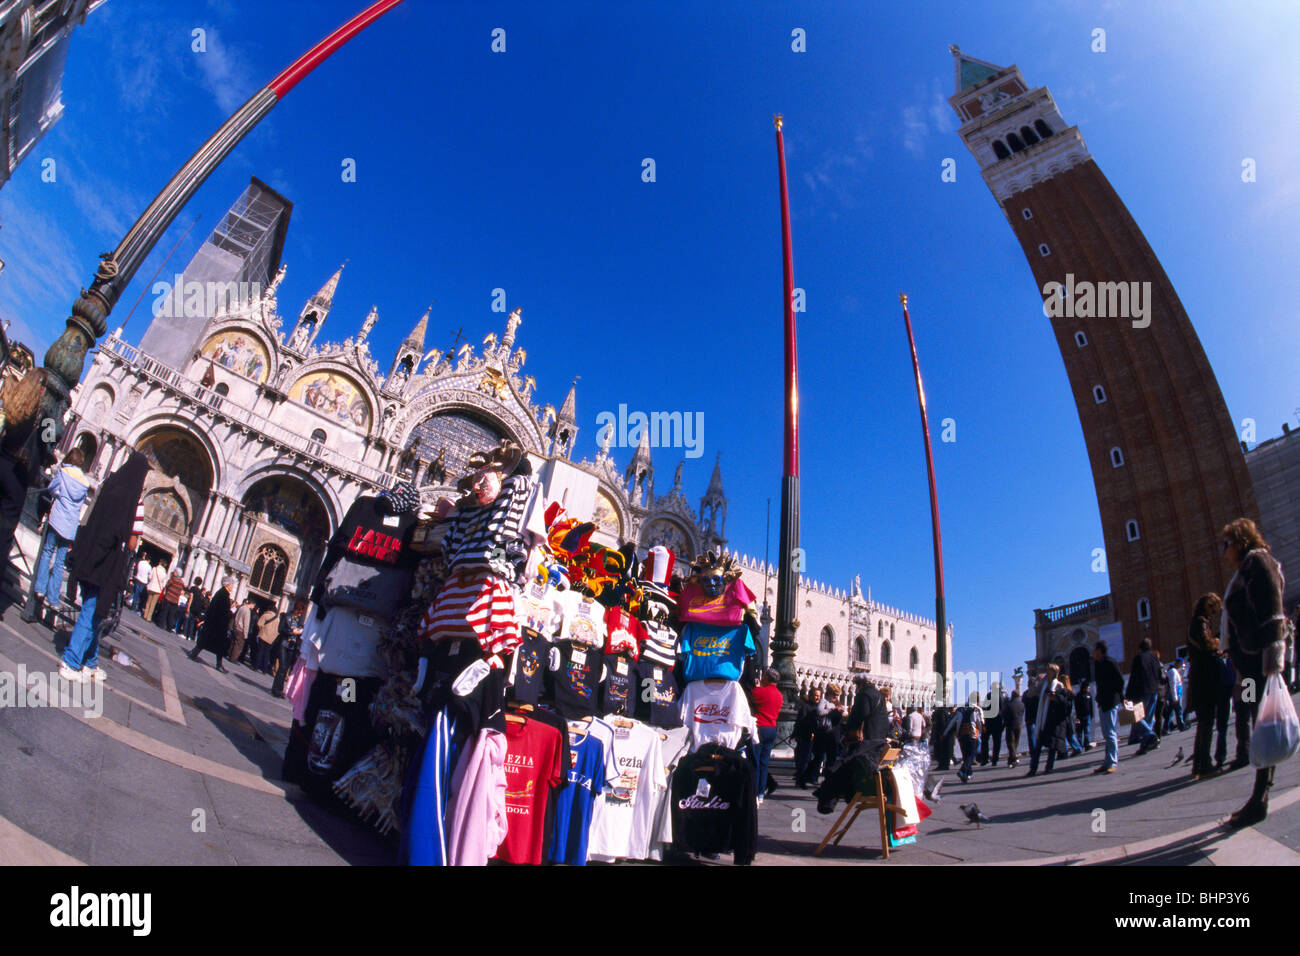 Venice, March 2008 -- Fisheye view of St Mark's Basilica and the Campanile Bell Tower in Venice. Stock Photo